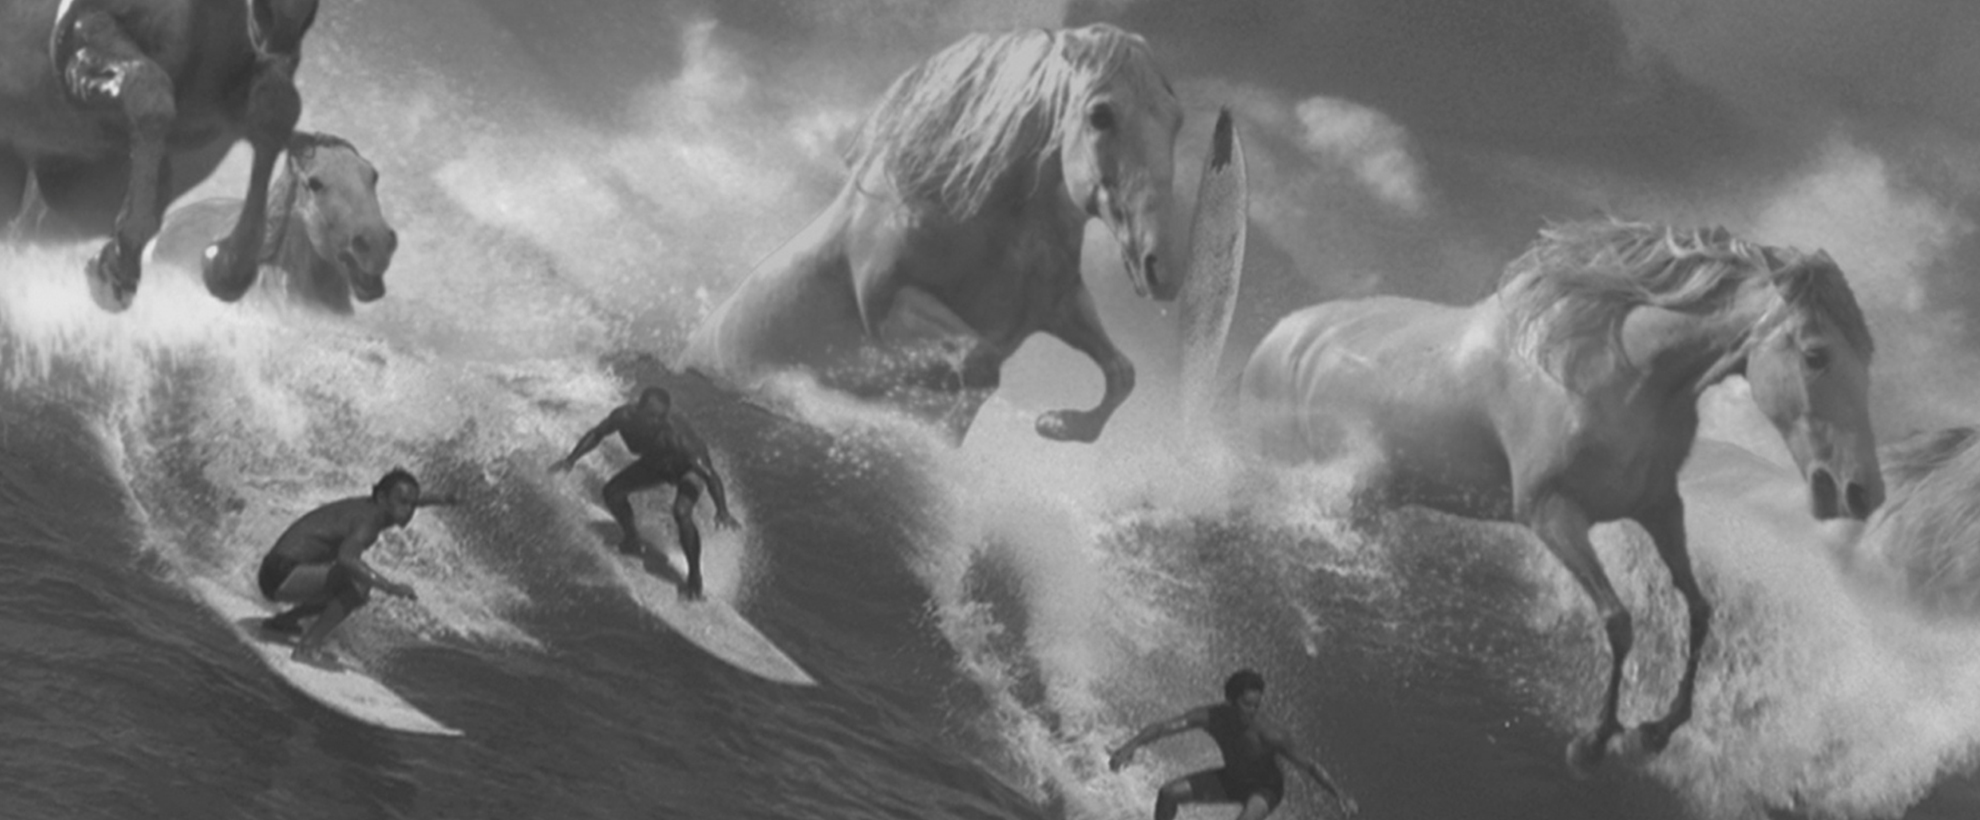 Surfers ride a large wave while giant horses gallop through the wave as well